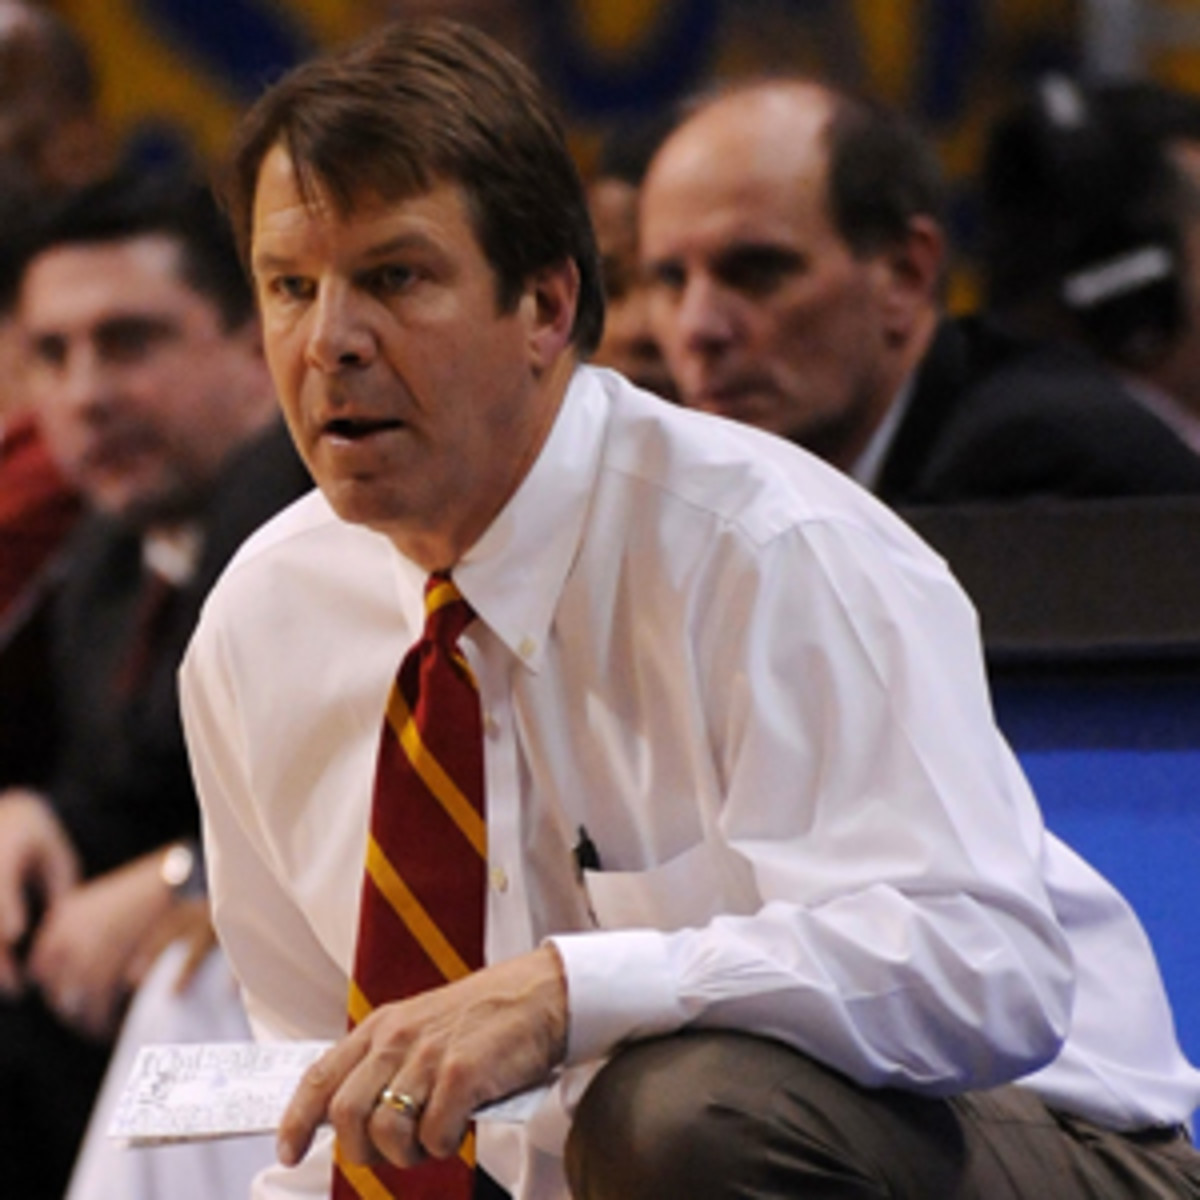 Tim Floyd resigned as USC coach in 2009 during an NCAA investigation. (Harry How/Getty Images)